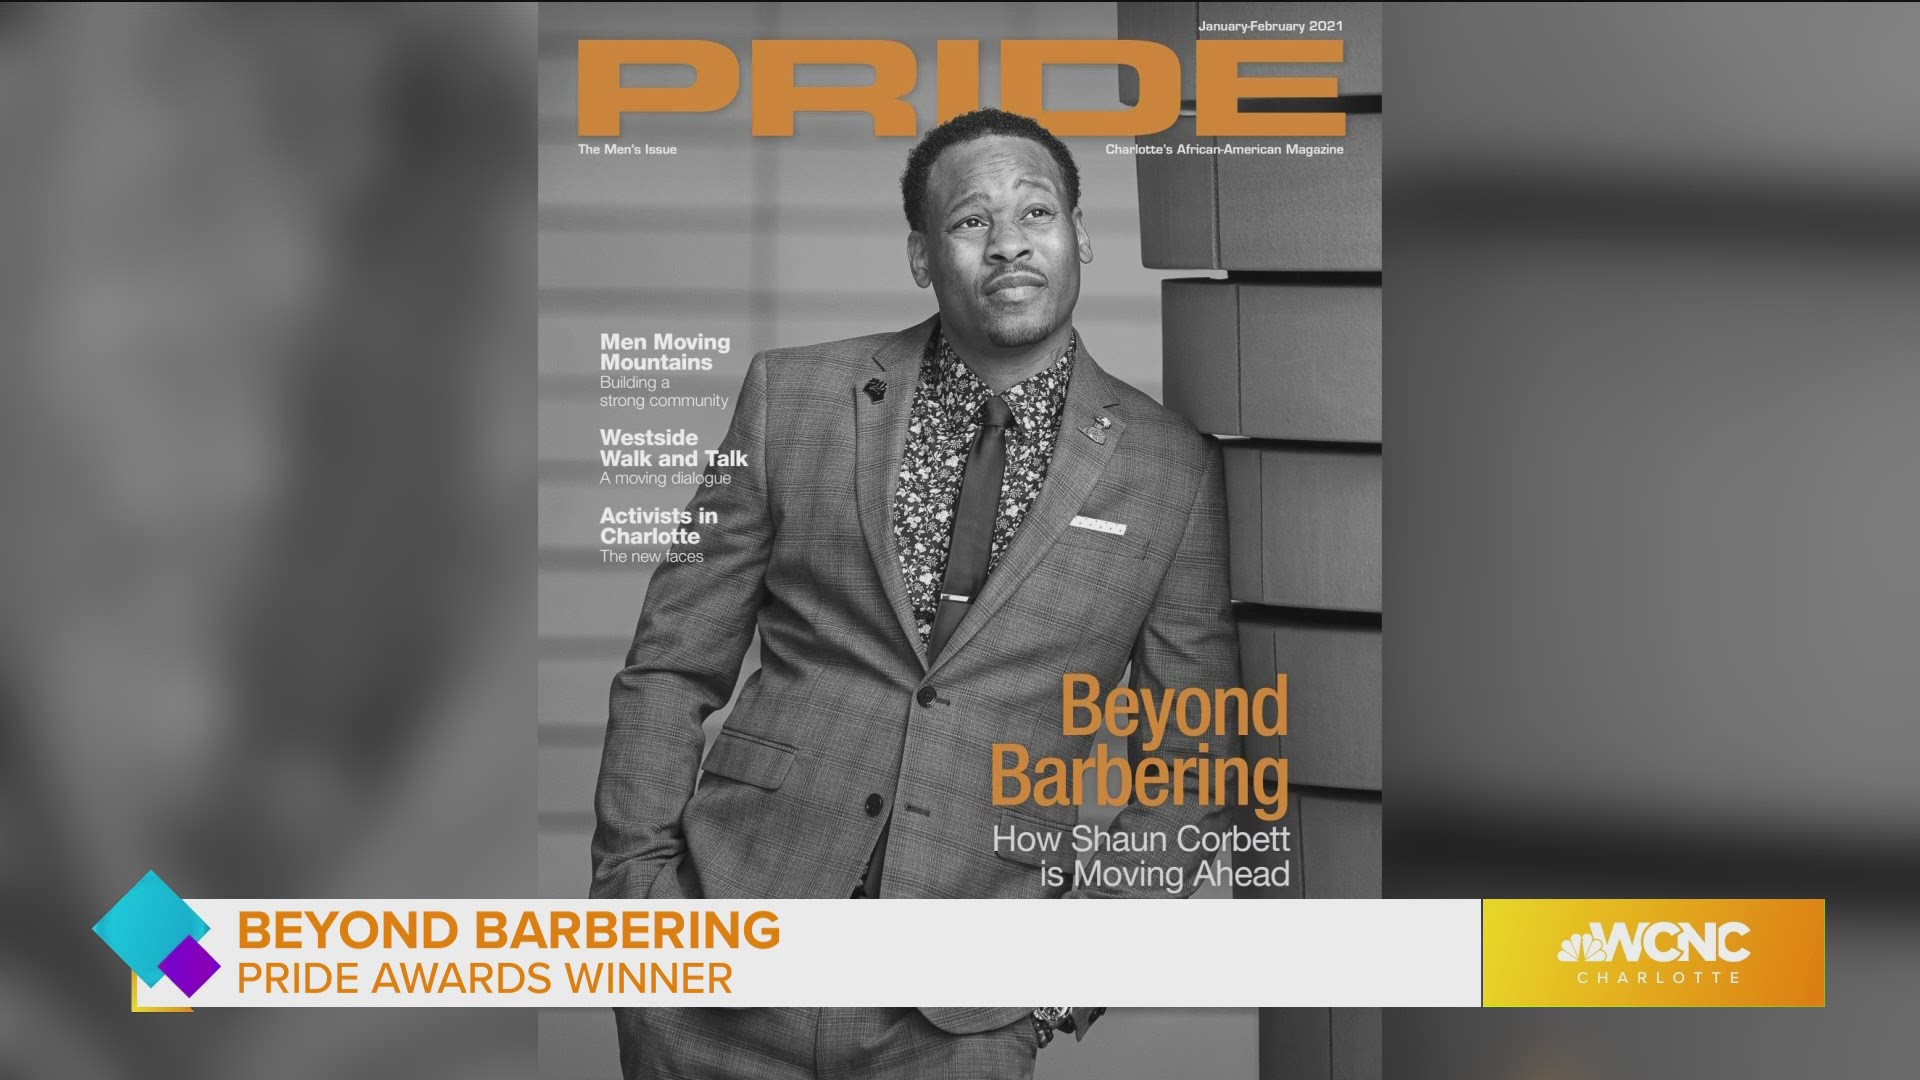 Learn more about Shaun Corbett and why he became a Pride Awards winner